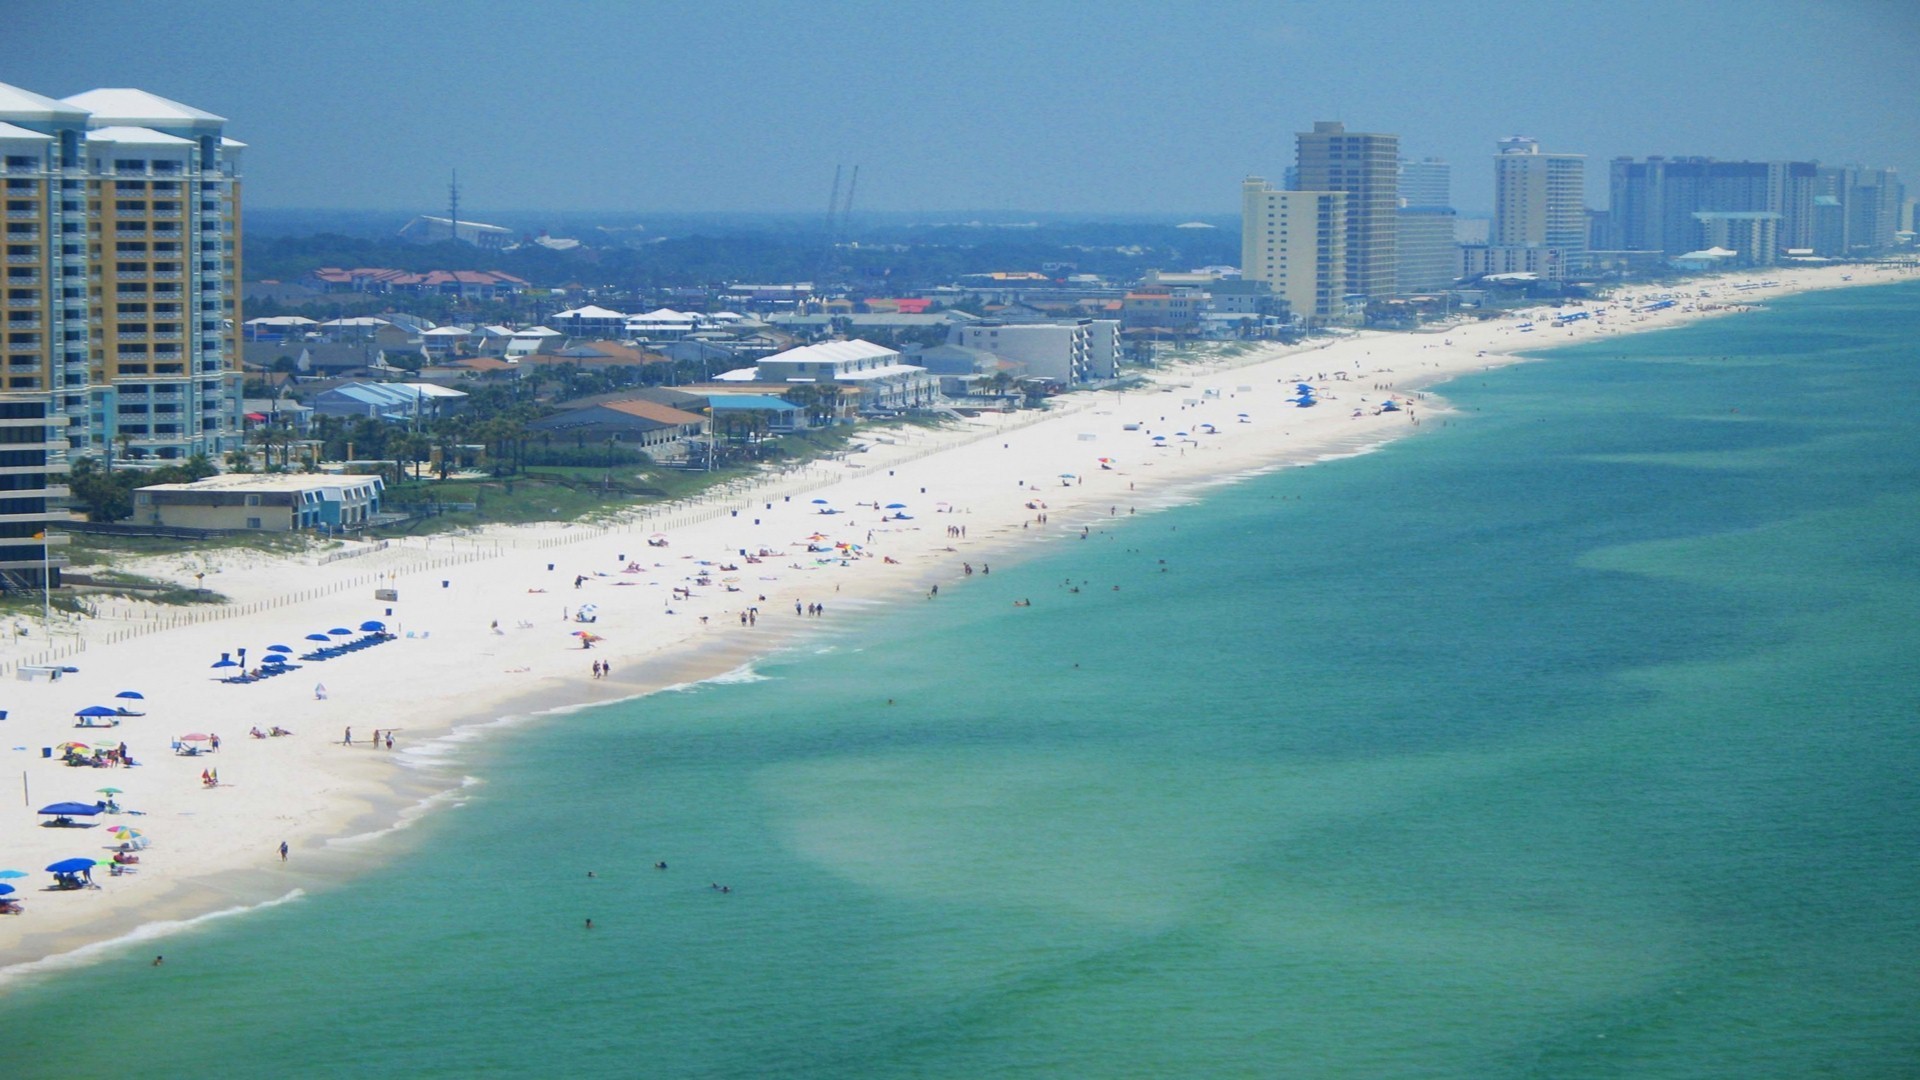 1920x1080 Amazing Panama City Beach in Florida US Torist Place HD Wallpapers | HD  Wallpapers